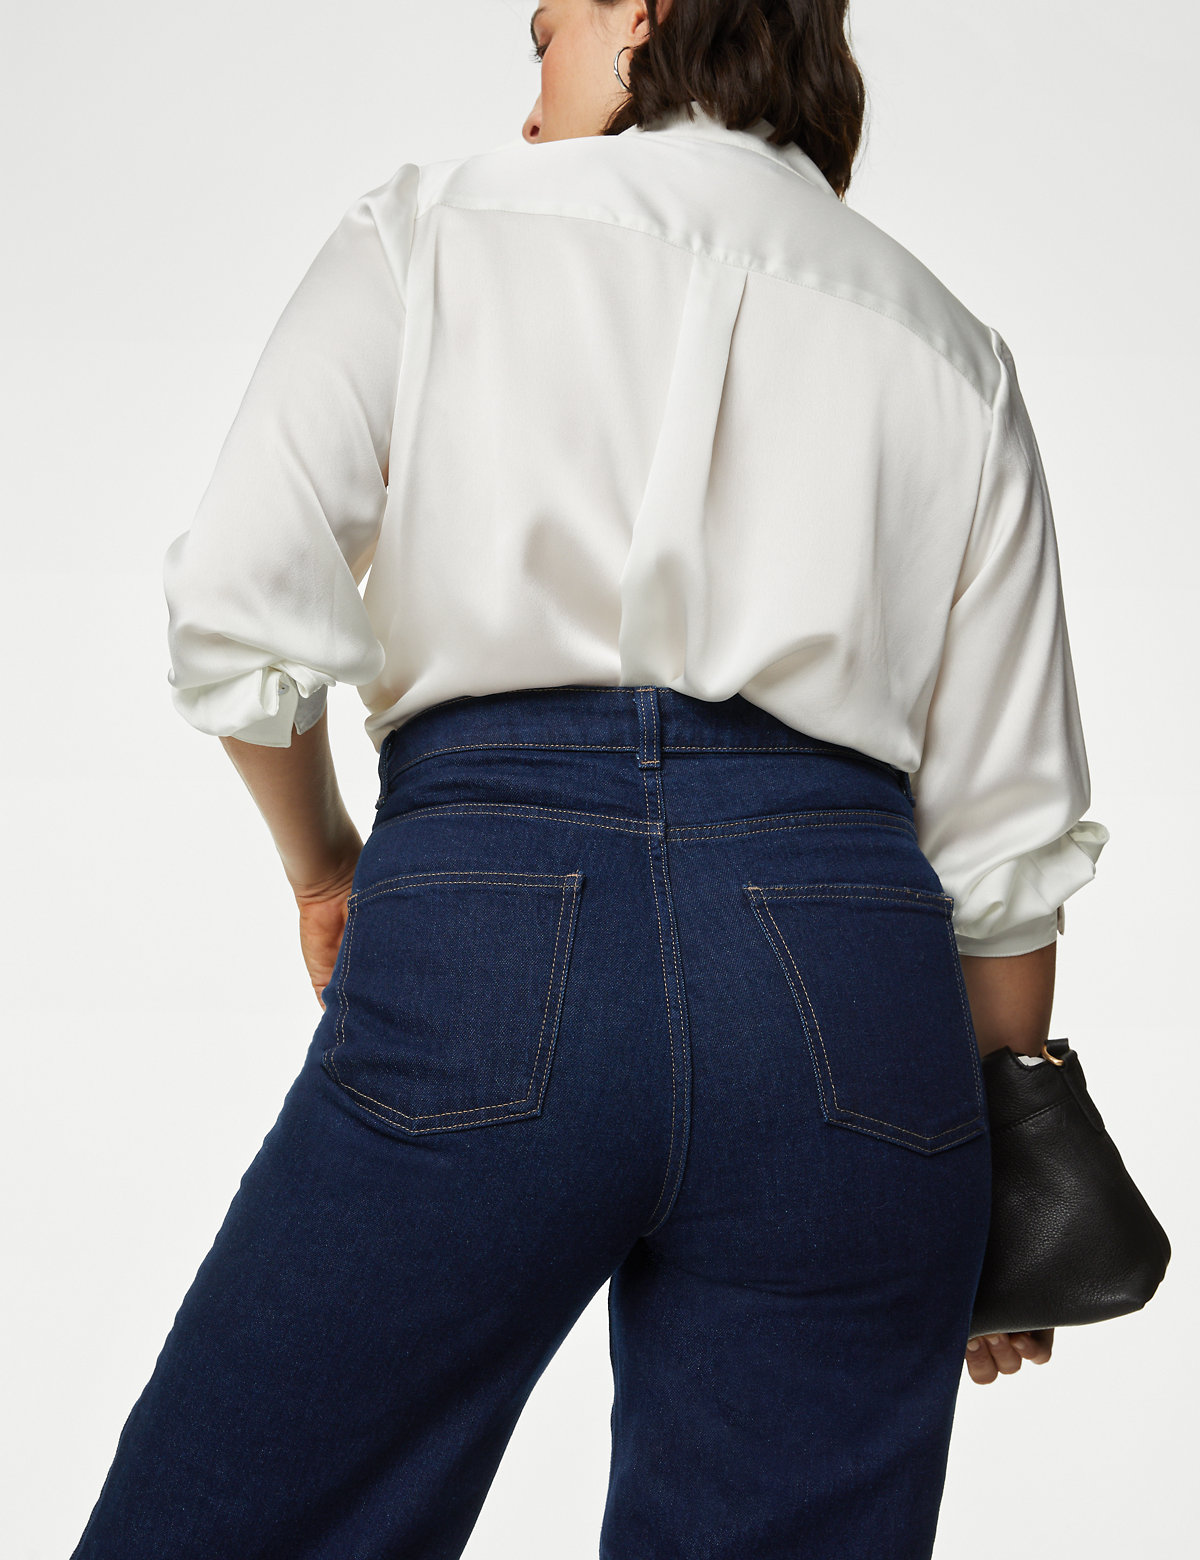 The Wide-Leg Jeans